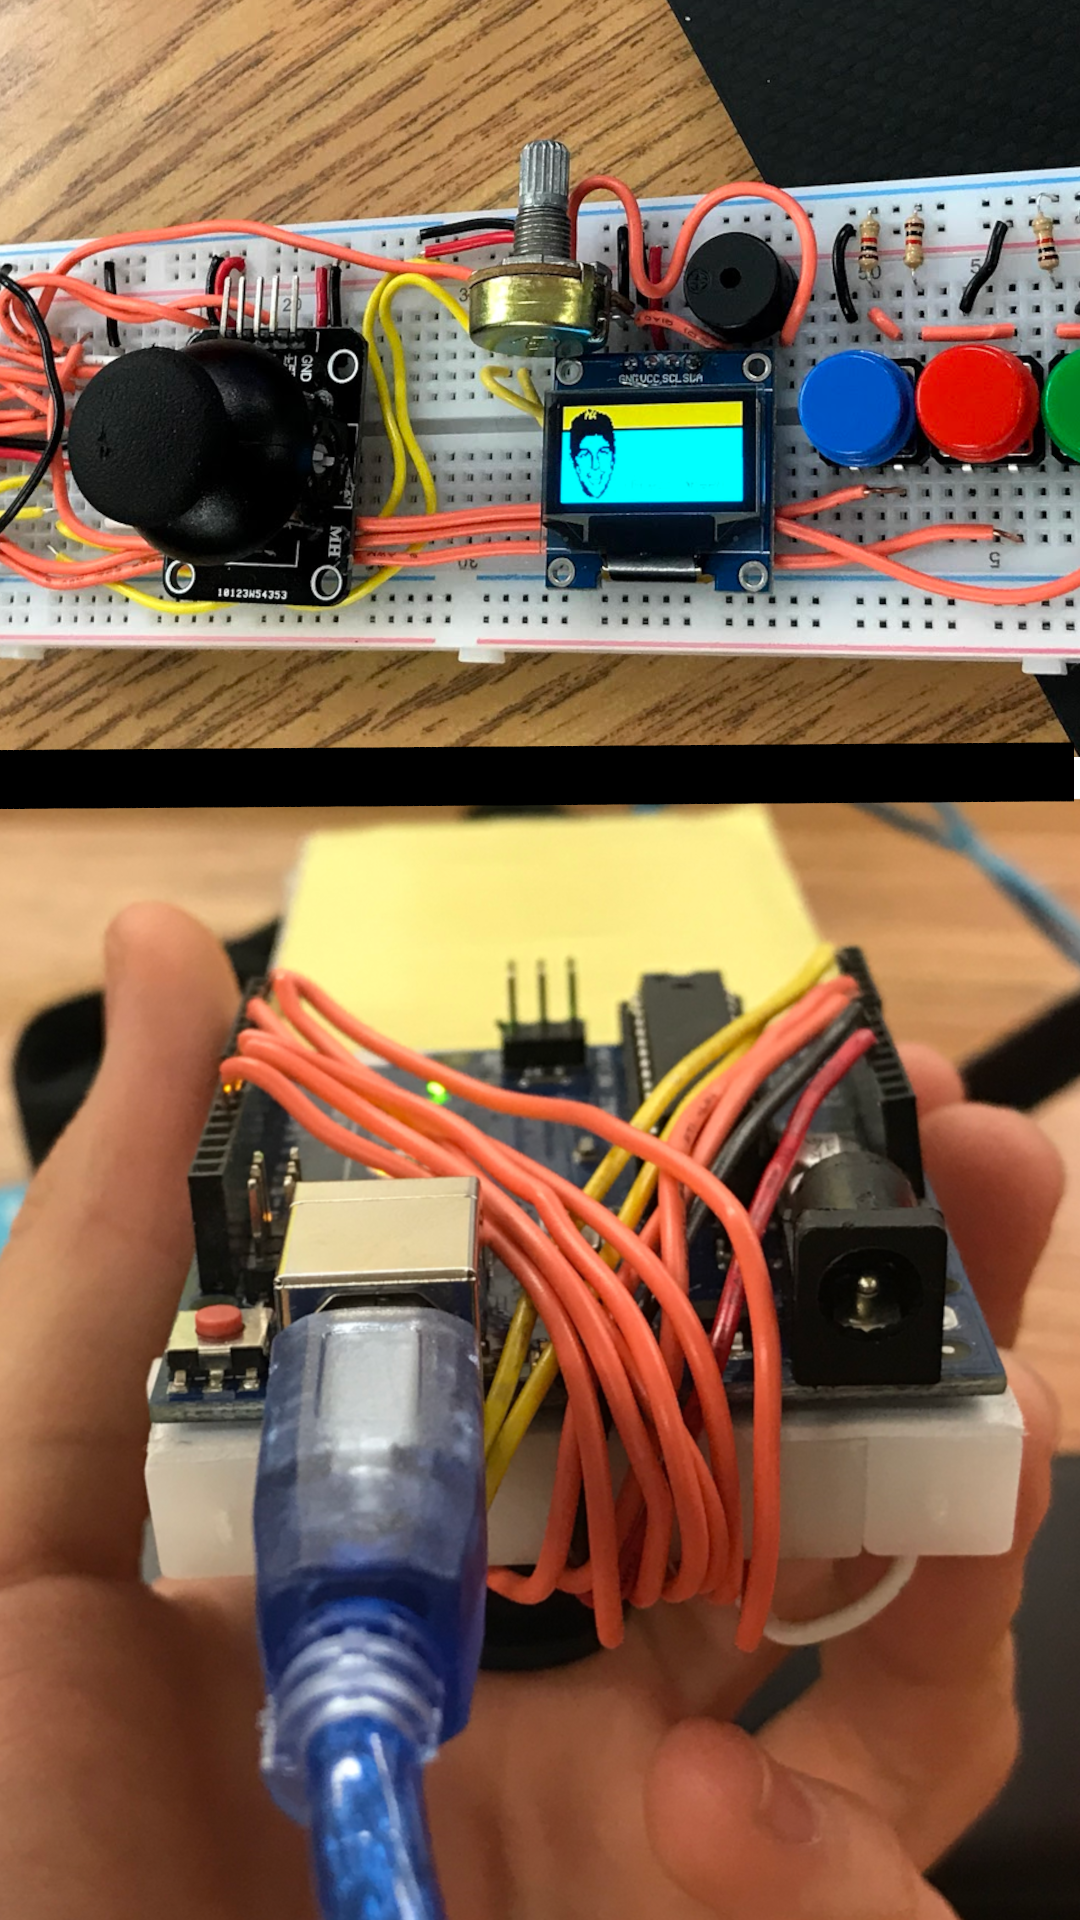 Thumbnail of Portable Game Console on a Breadboard